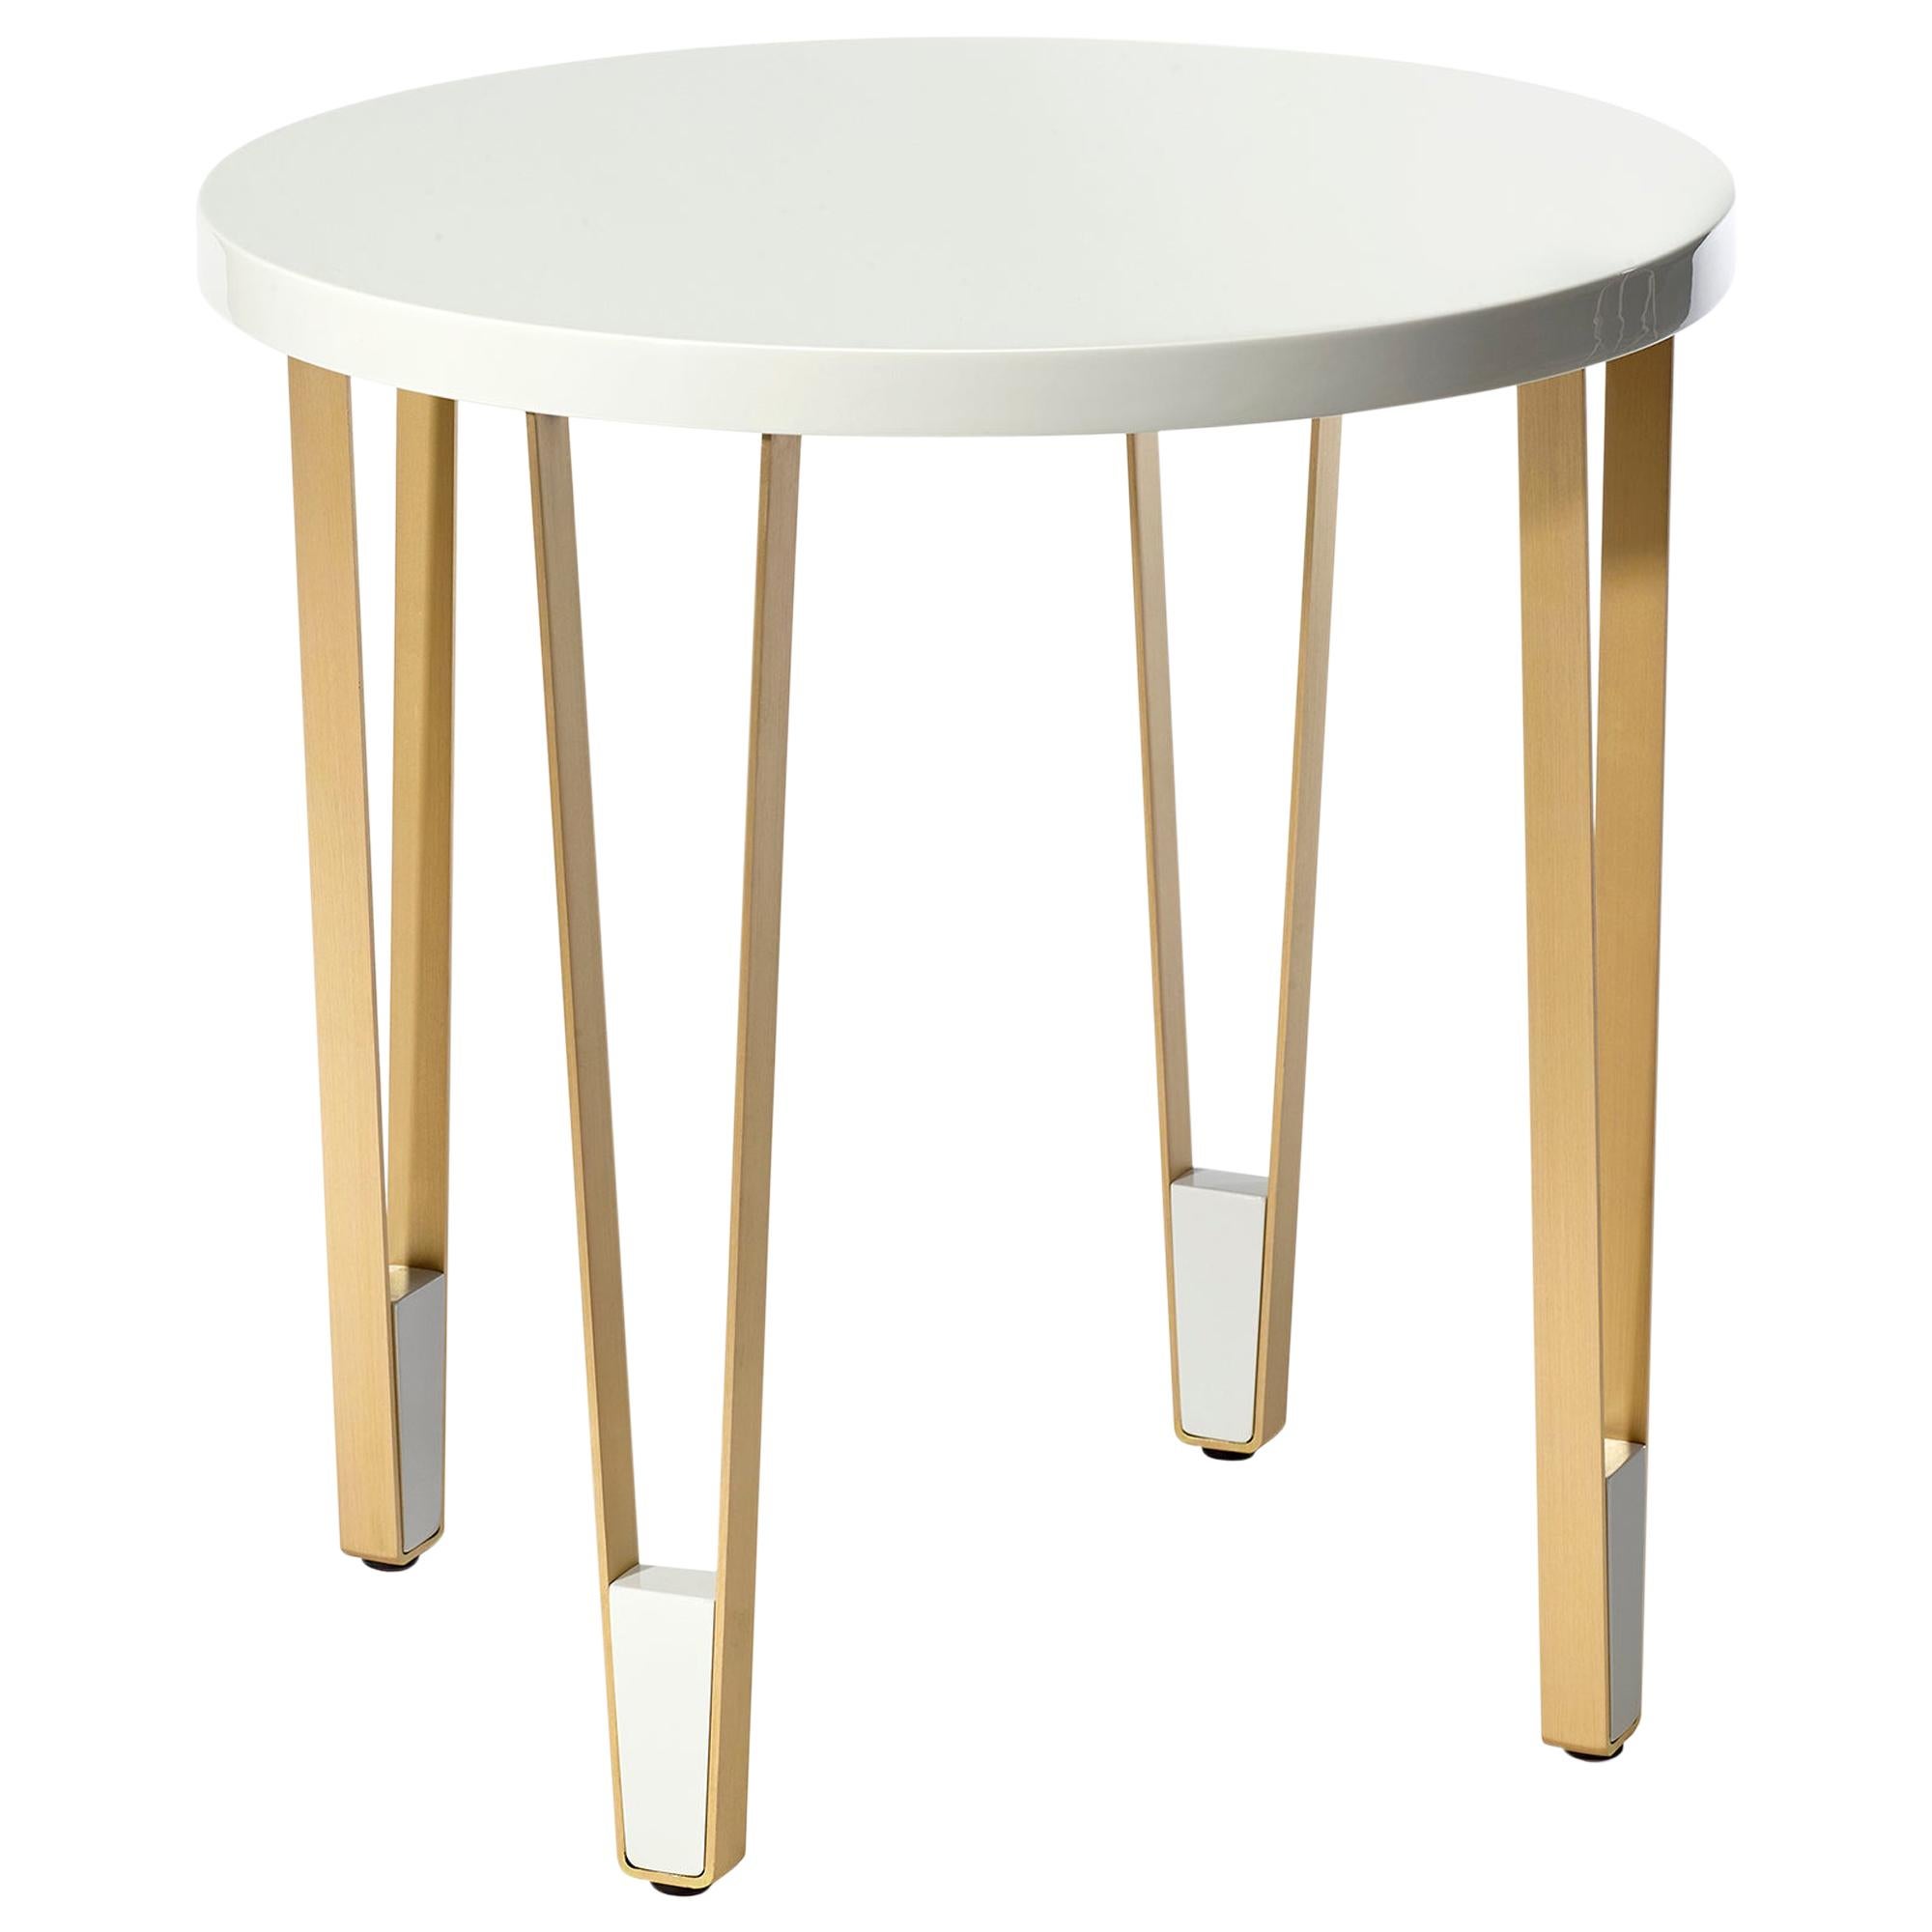 Ionic Round Side Table, White and Brass, InsidherLand by Joana Santos Barbosa For Sale